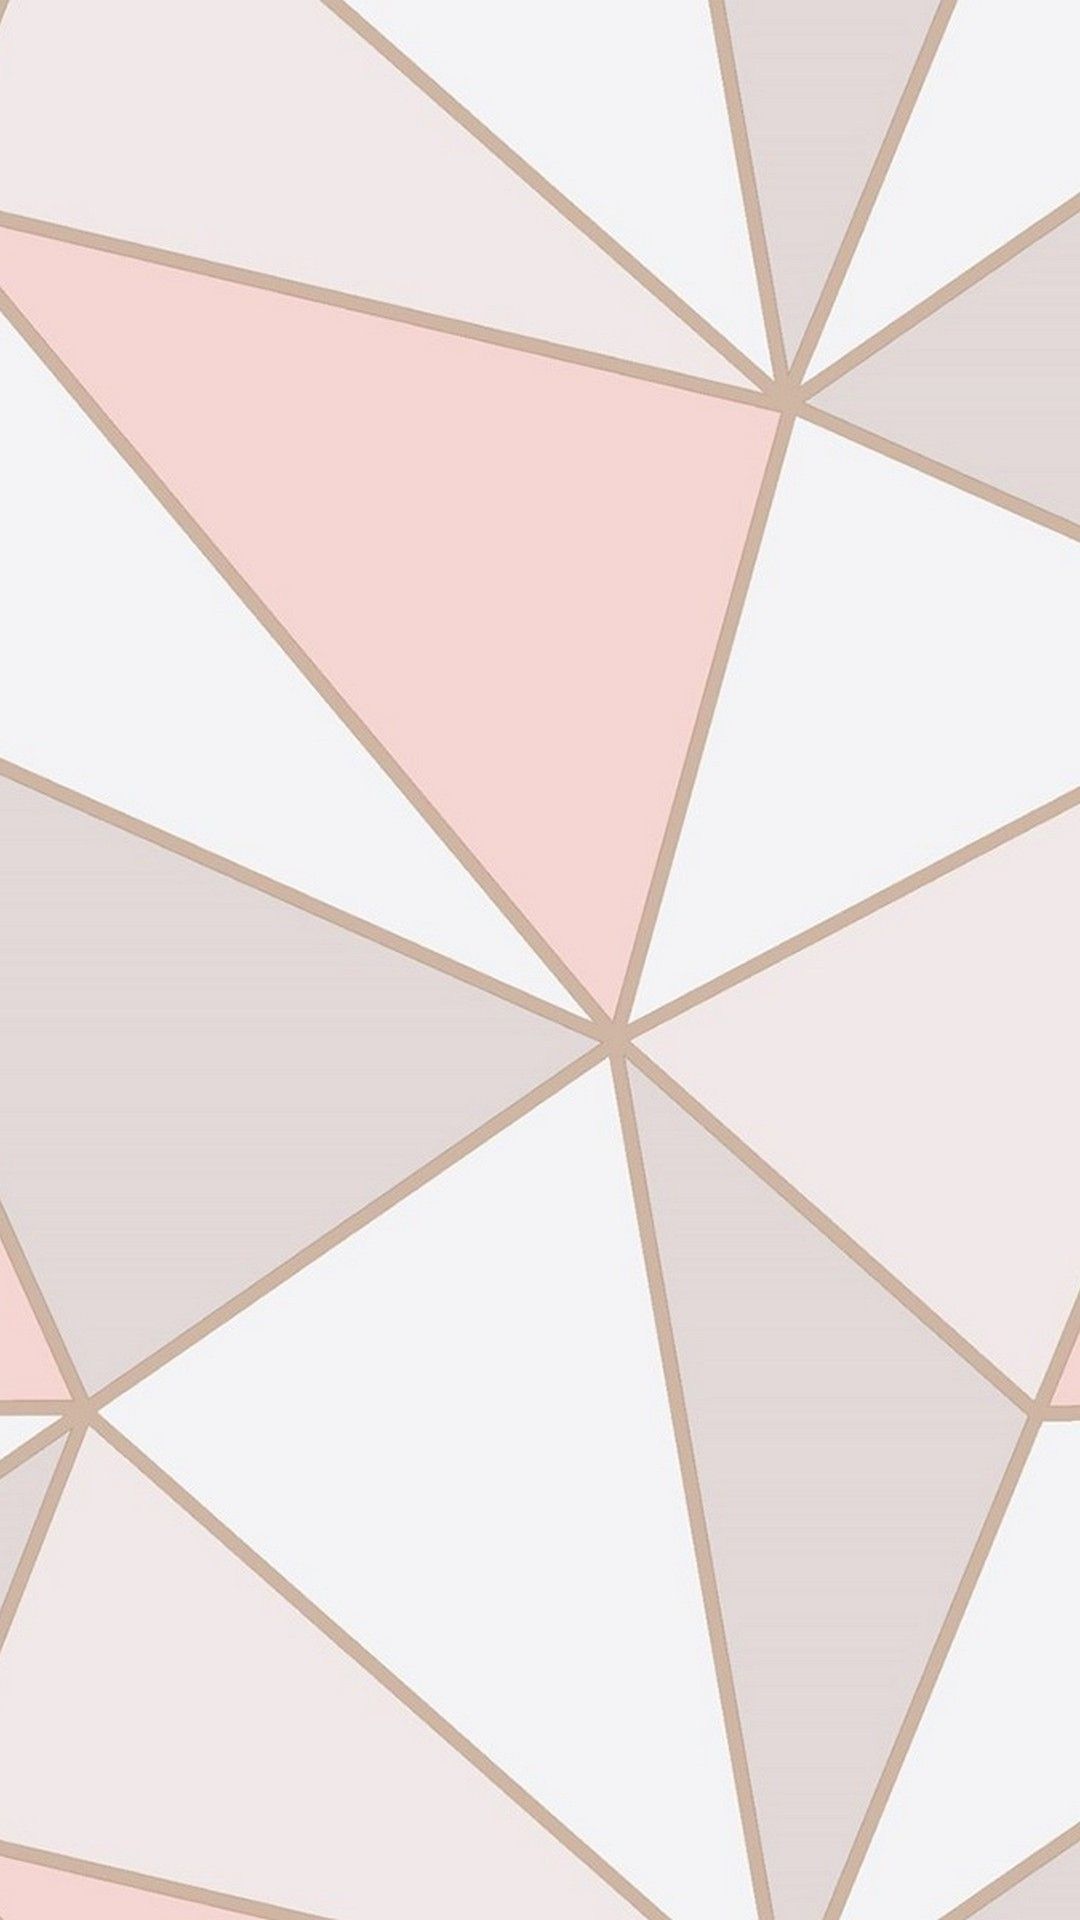 Rose Gold iPhone Wallpapers on WallpaperDog